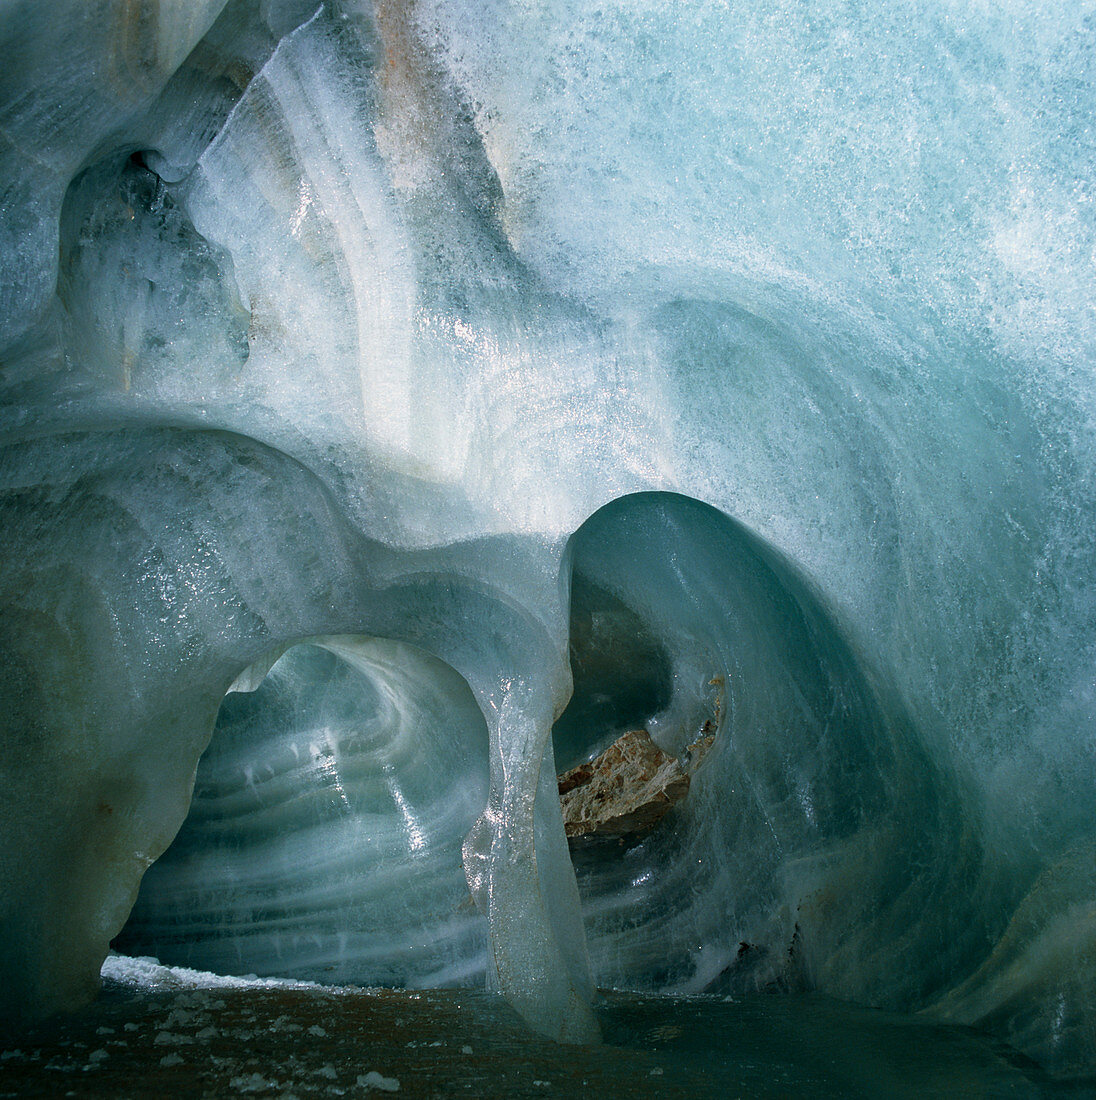 View of an ice cave